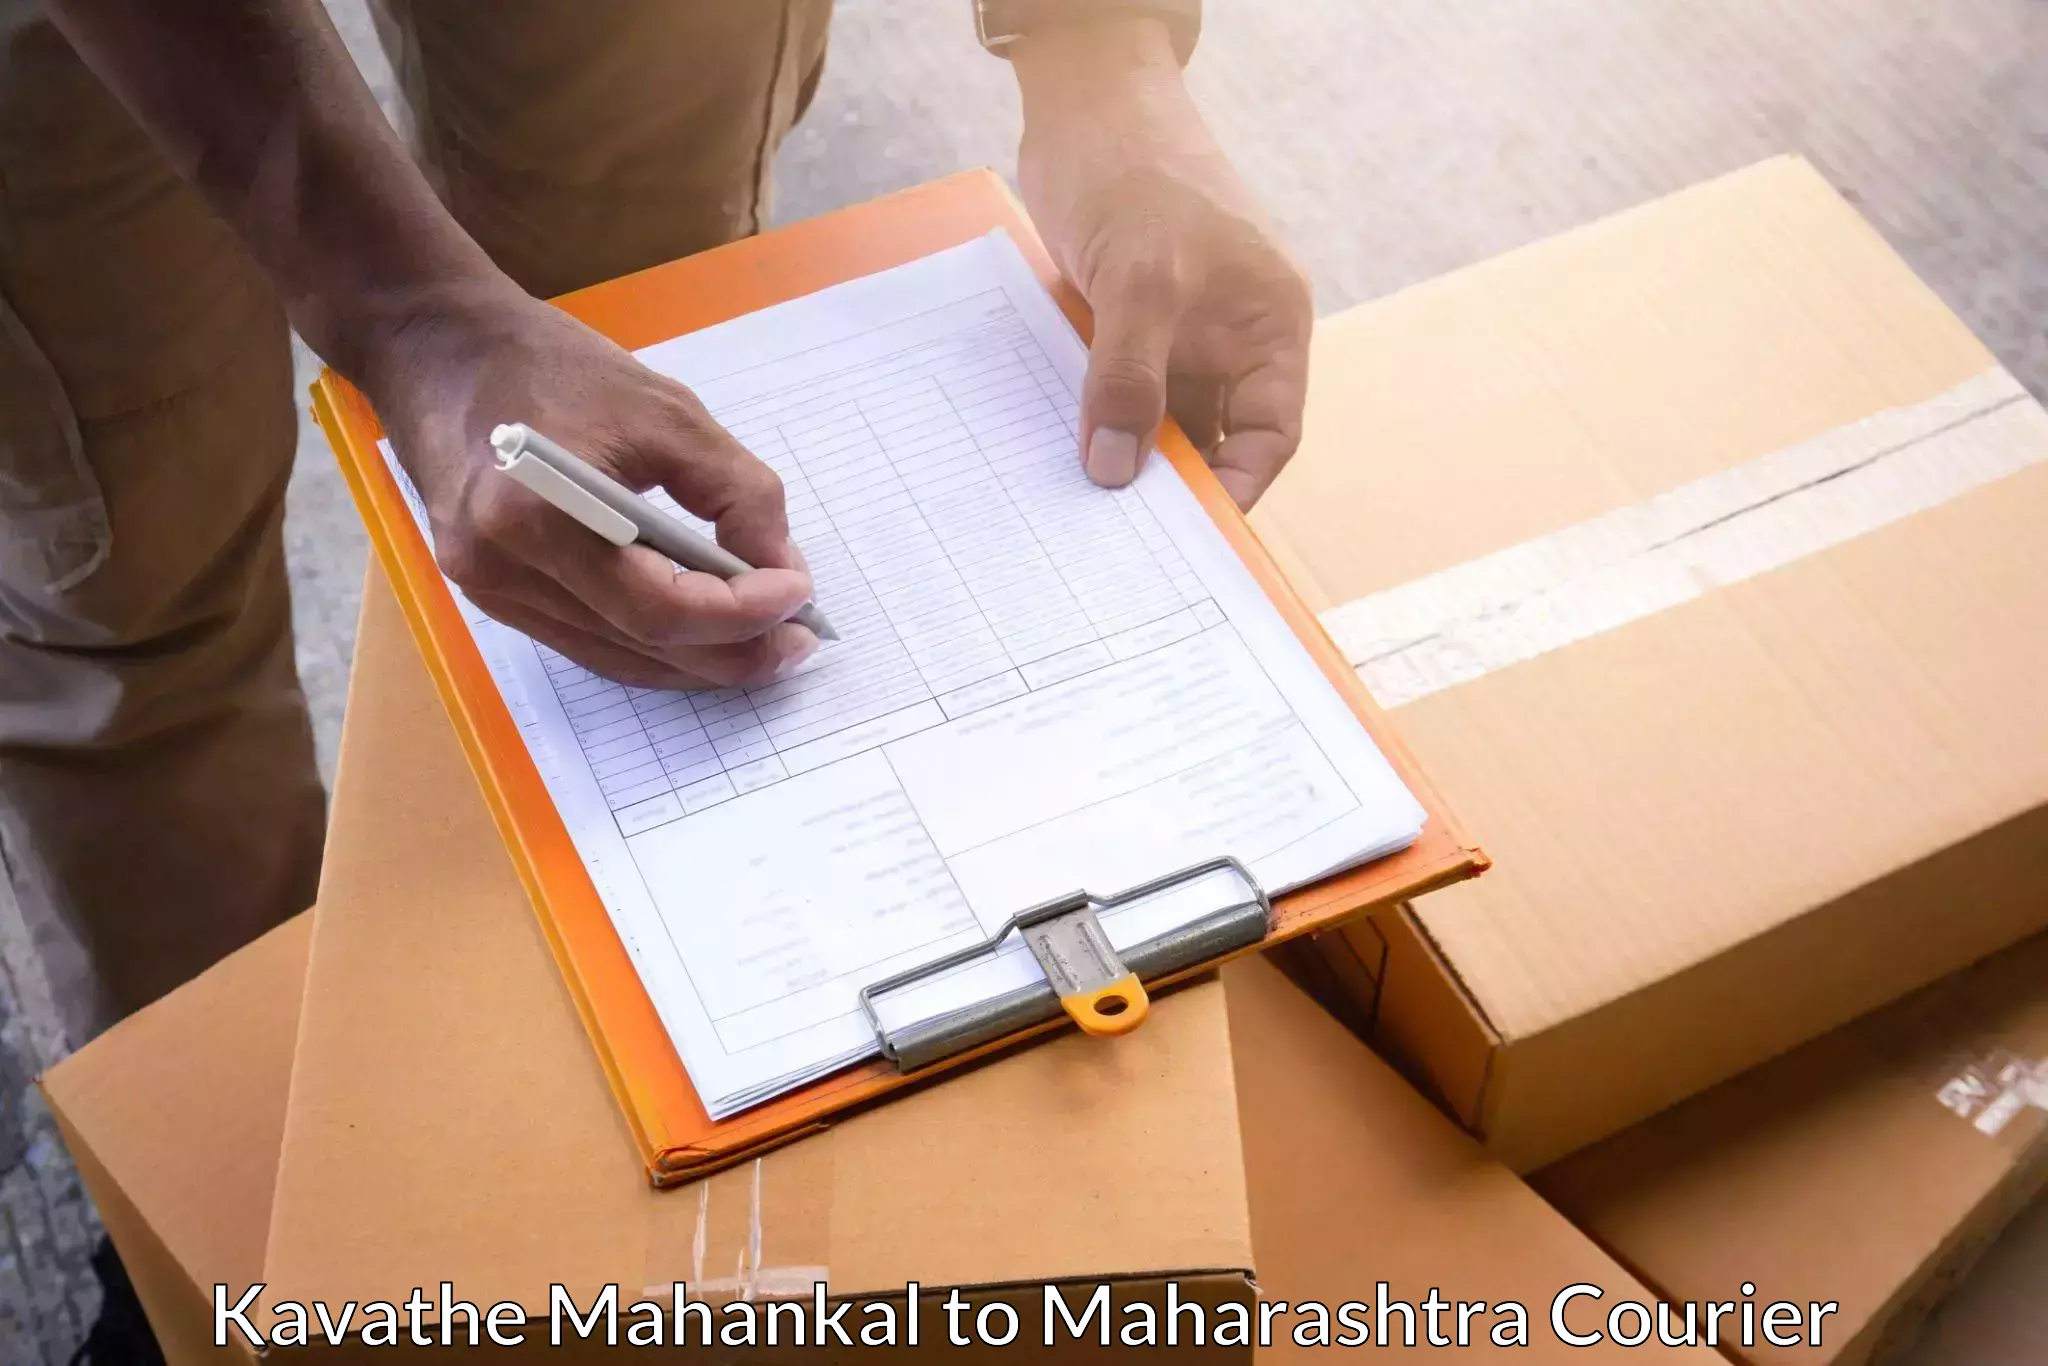 Multi-service courier options Kavathe Mahankal to Beed